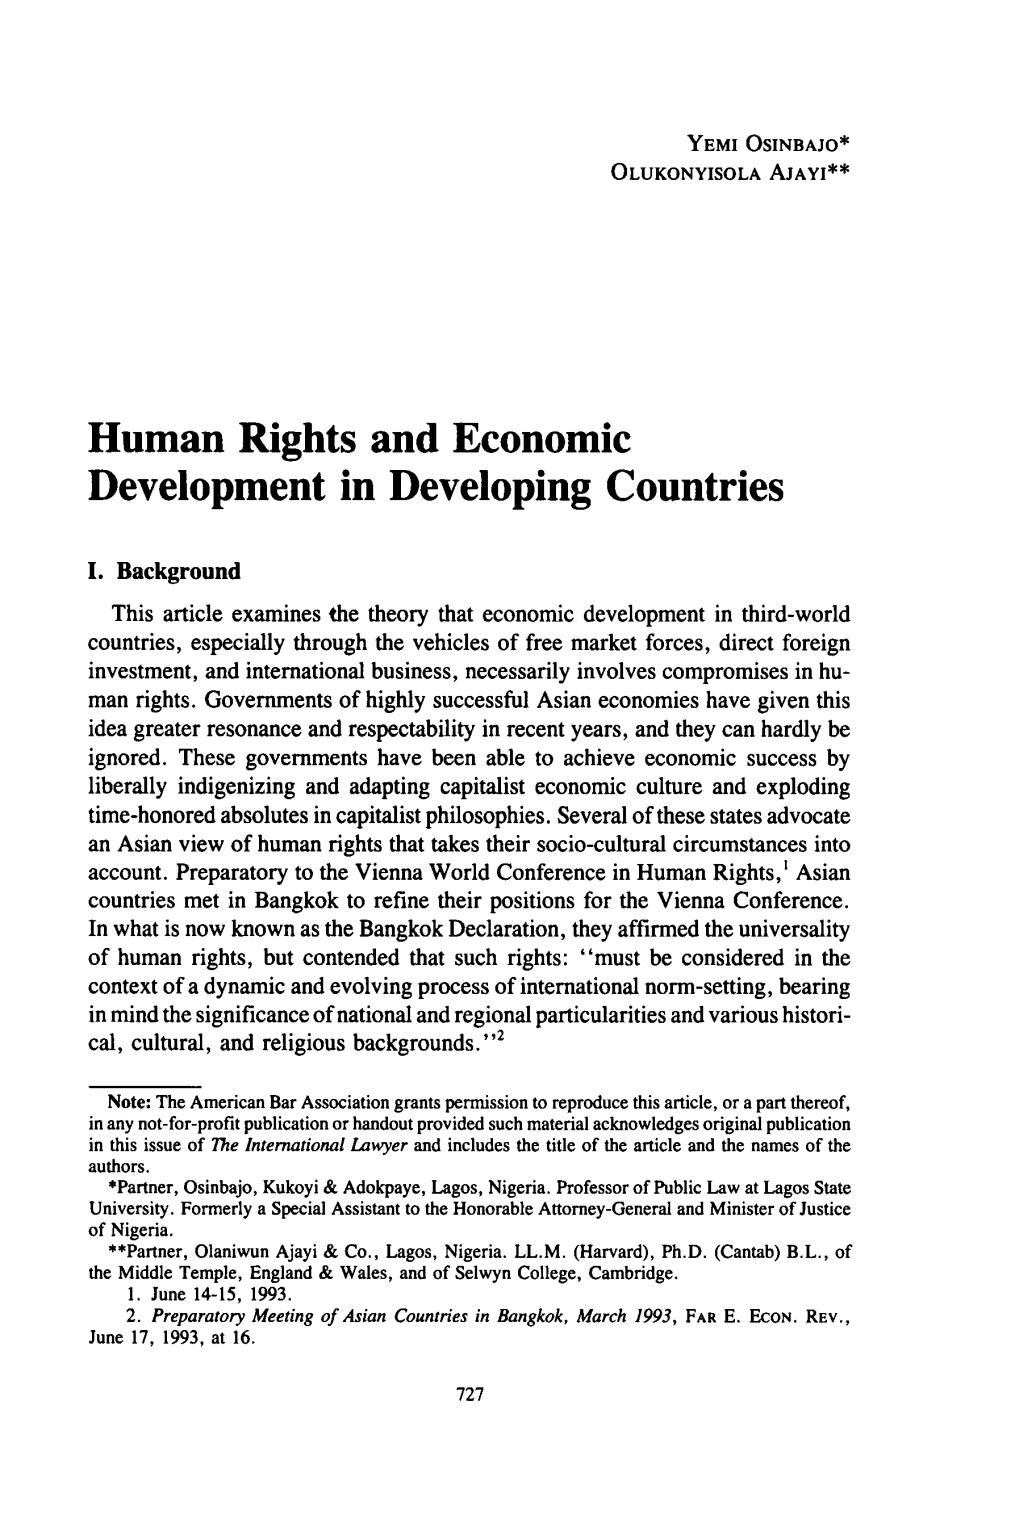 Human Rights and Economic Development in Devloping Countries